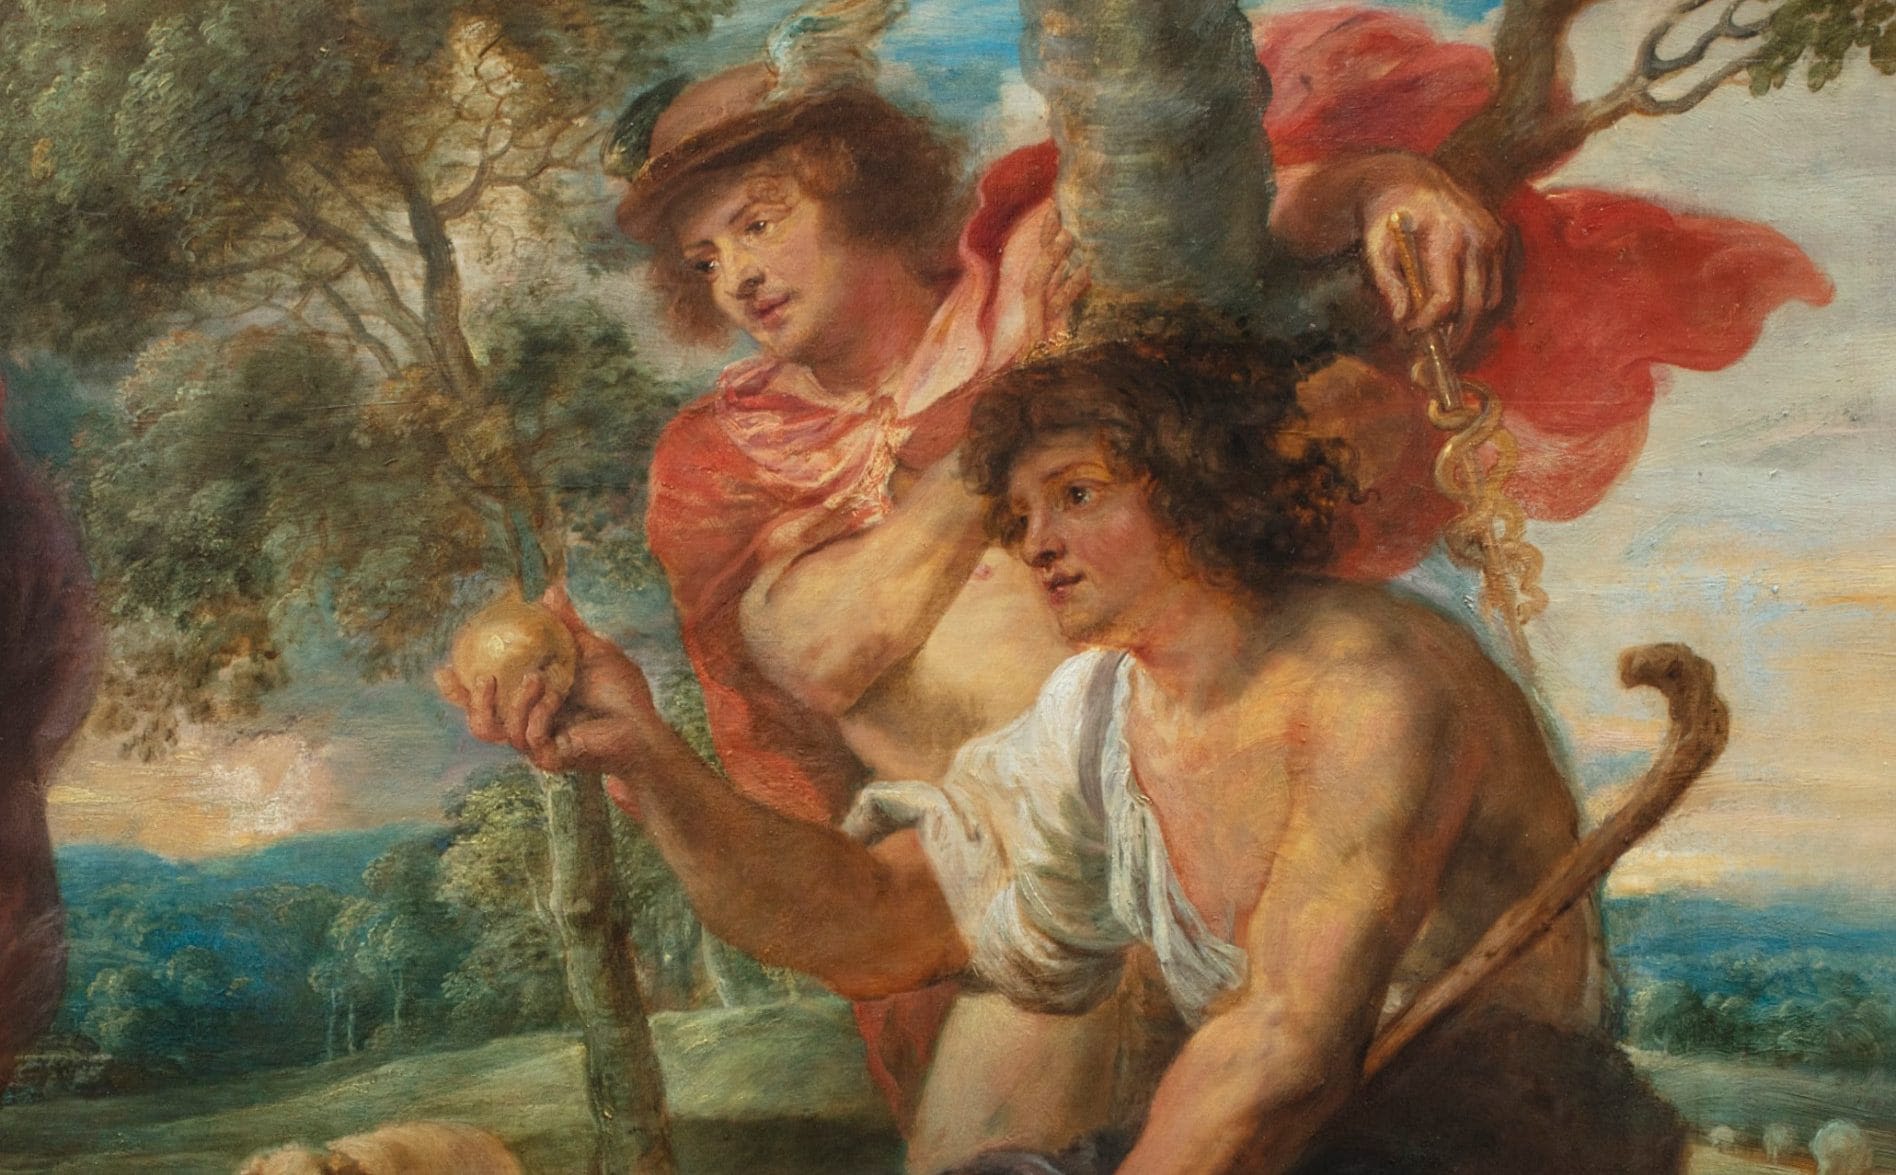 Rubens masterpiece retouched four times to make it ‘less erotic’